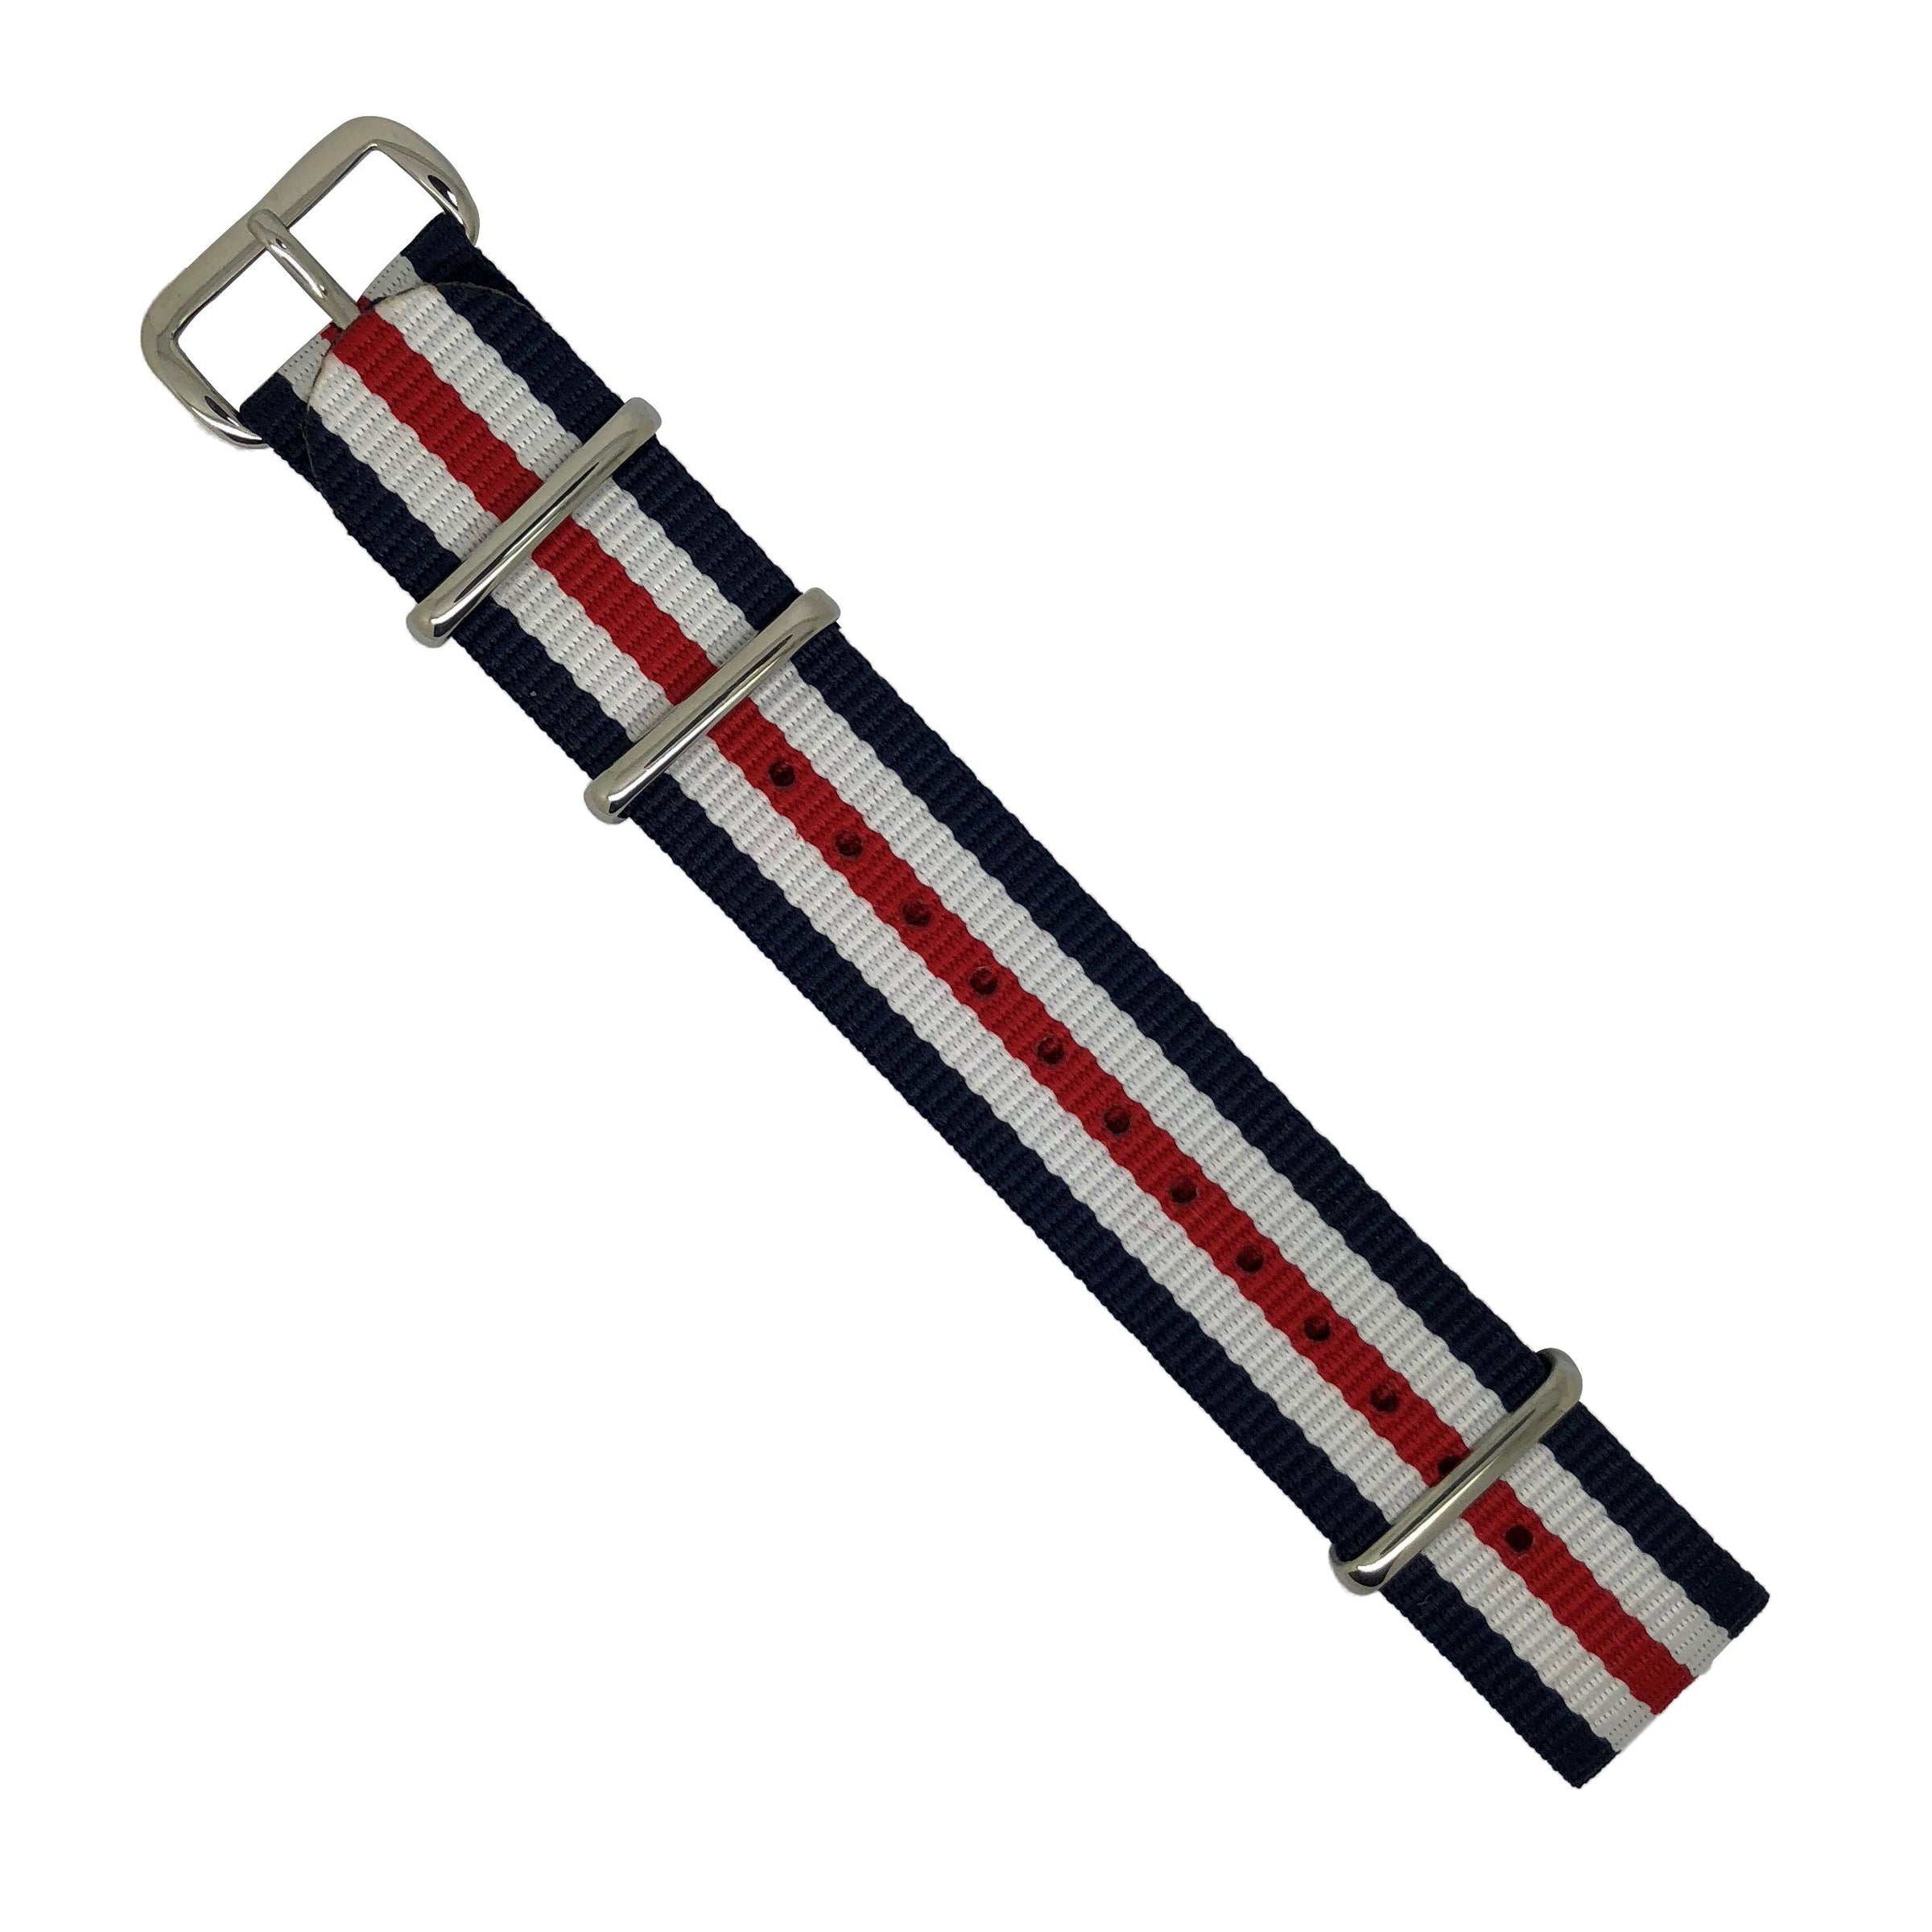 Premium Nato Strap in Regimental with Polished Silver Buckle (18mm)